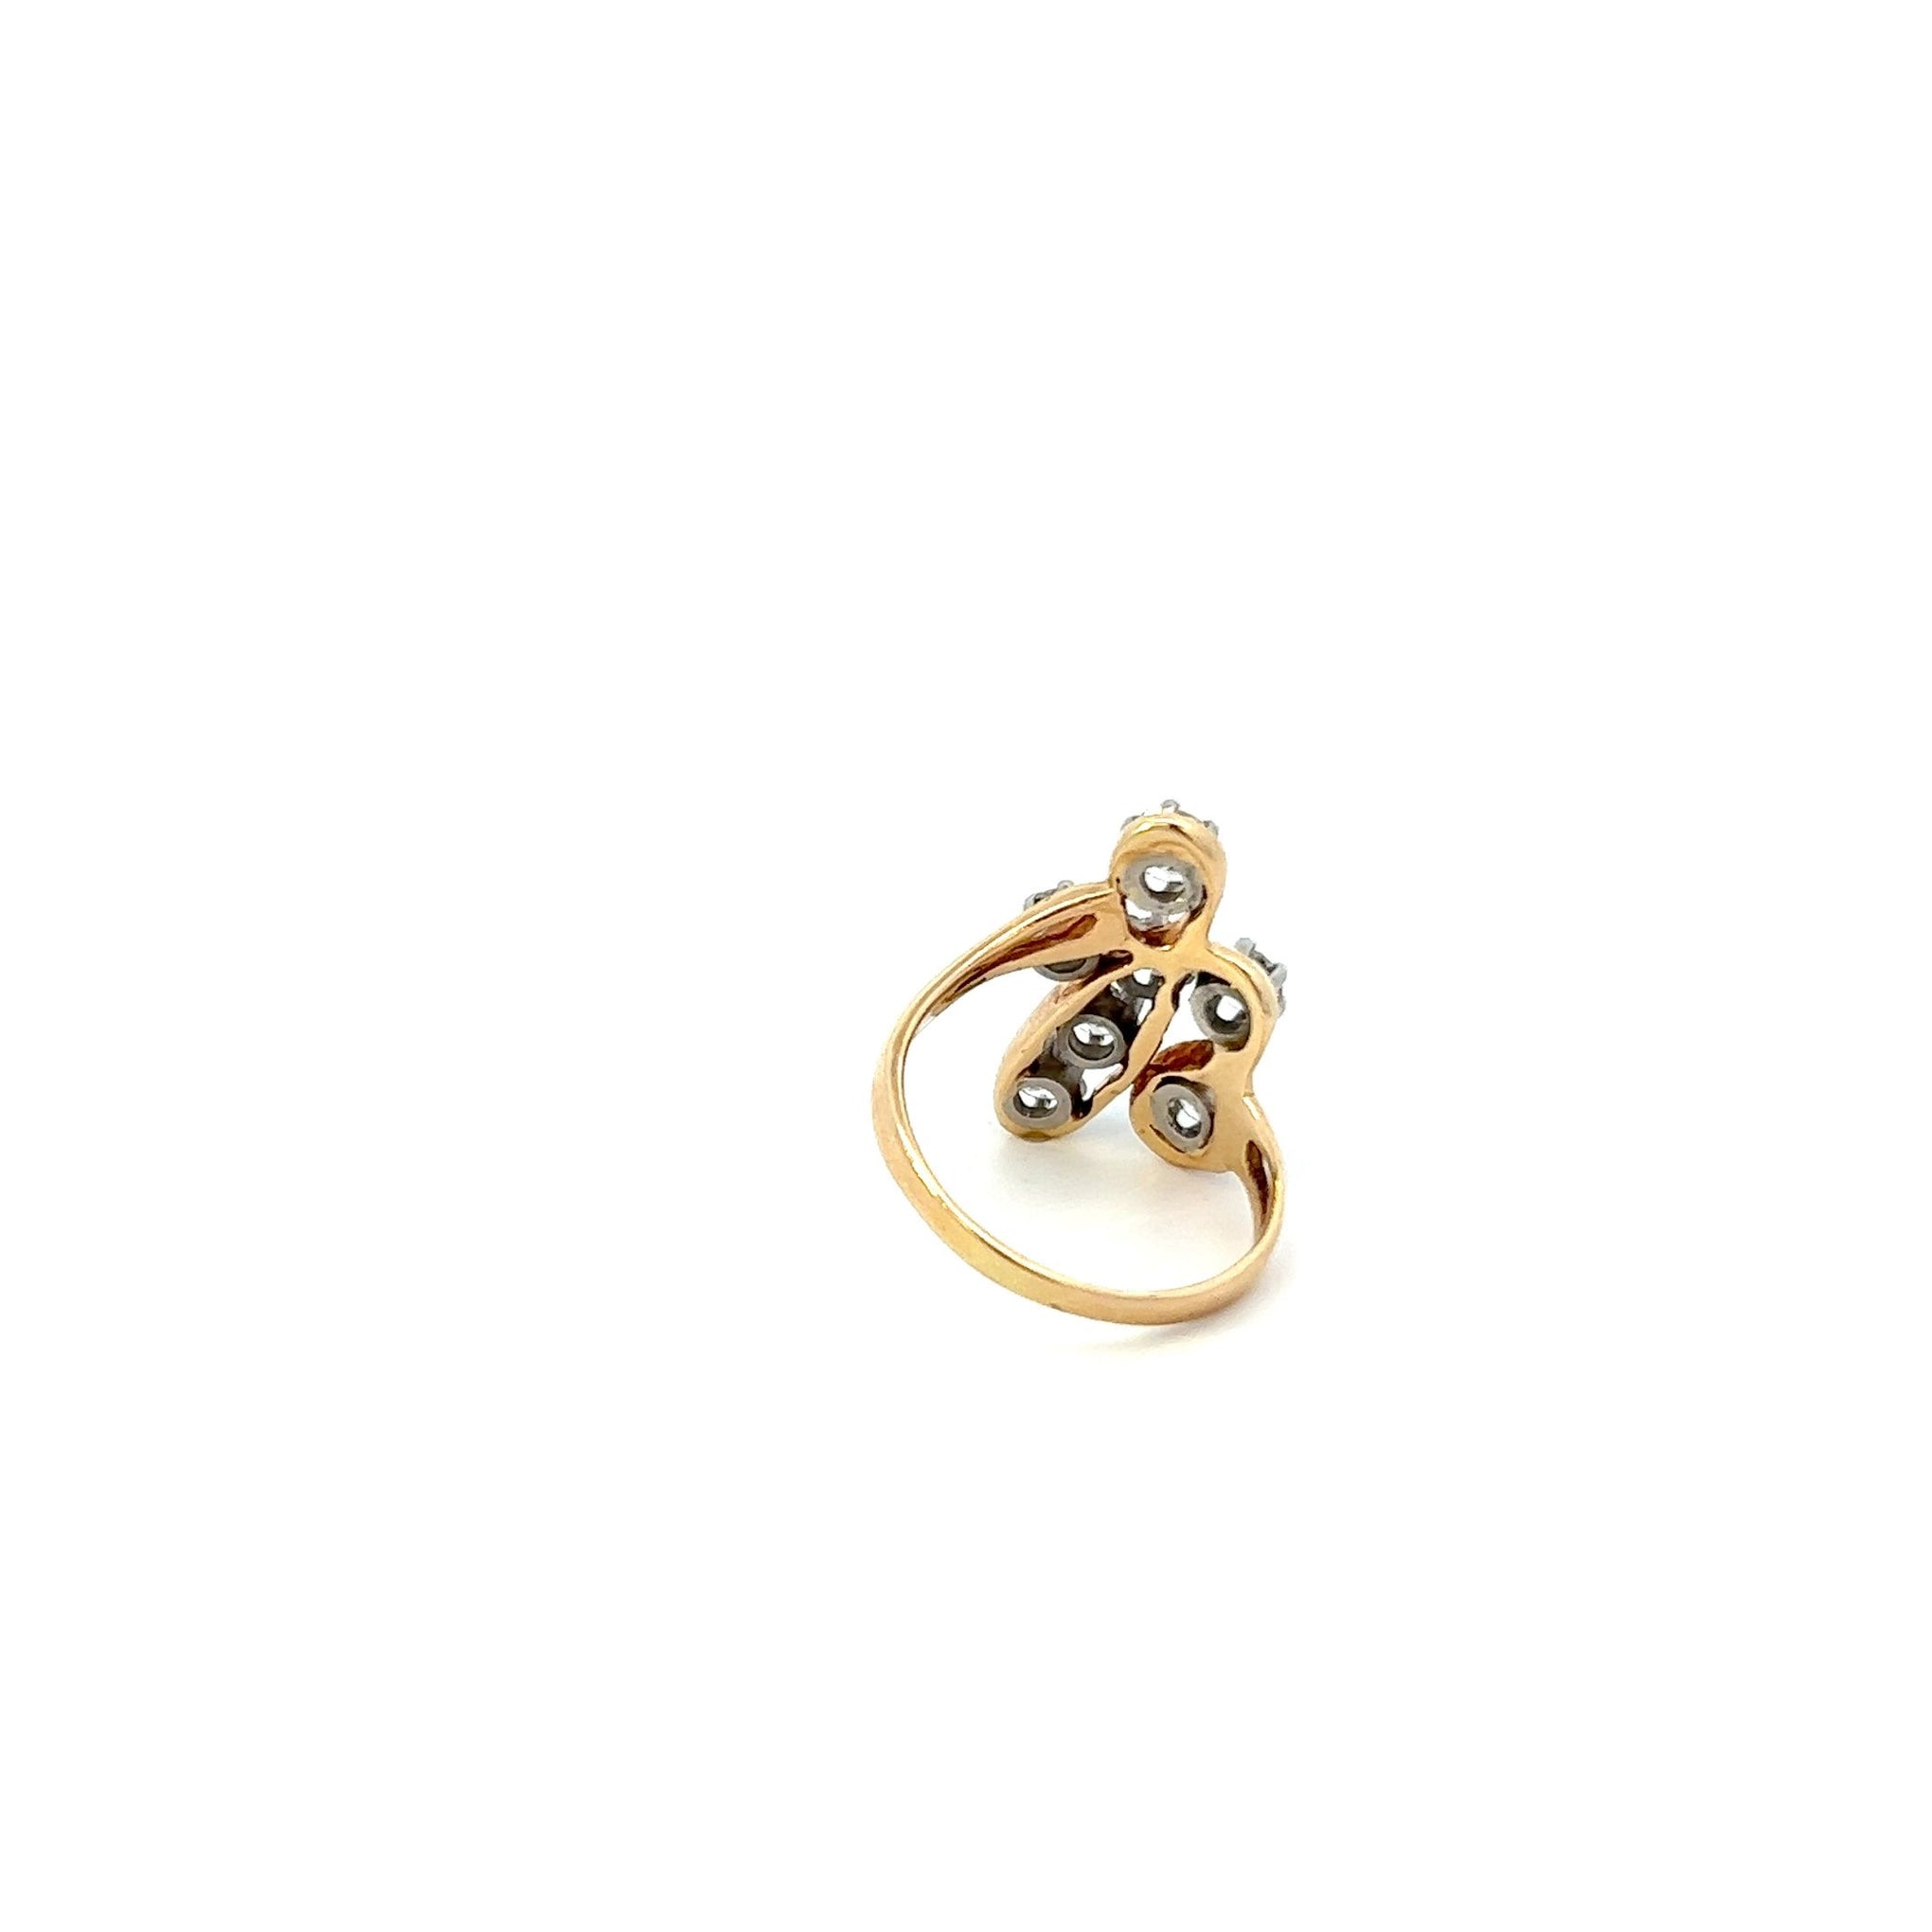 VINTAGE, 14KT YELLOW GOLD AND 7 ROUND CUT DIAMOND RING.